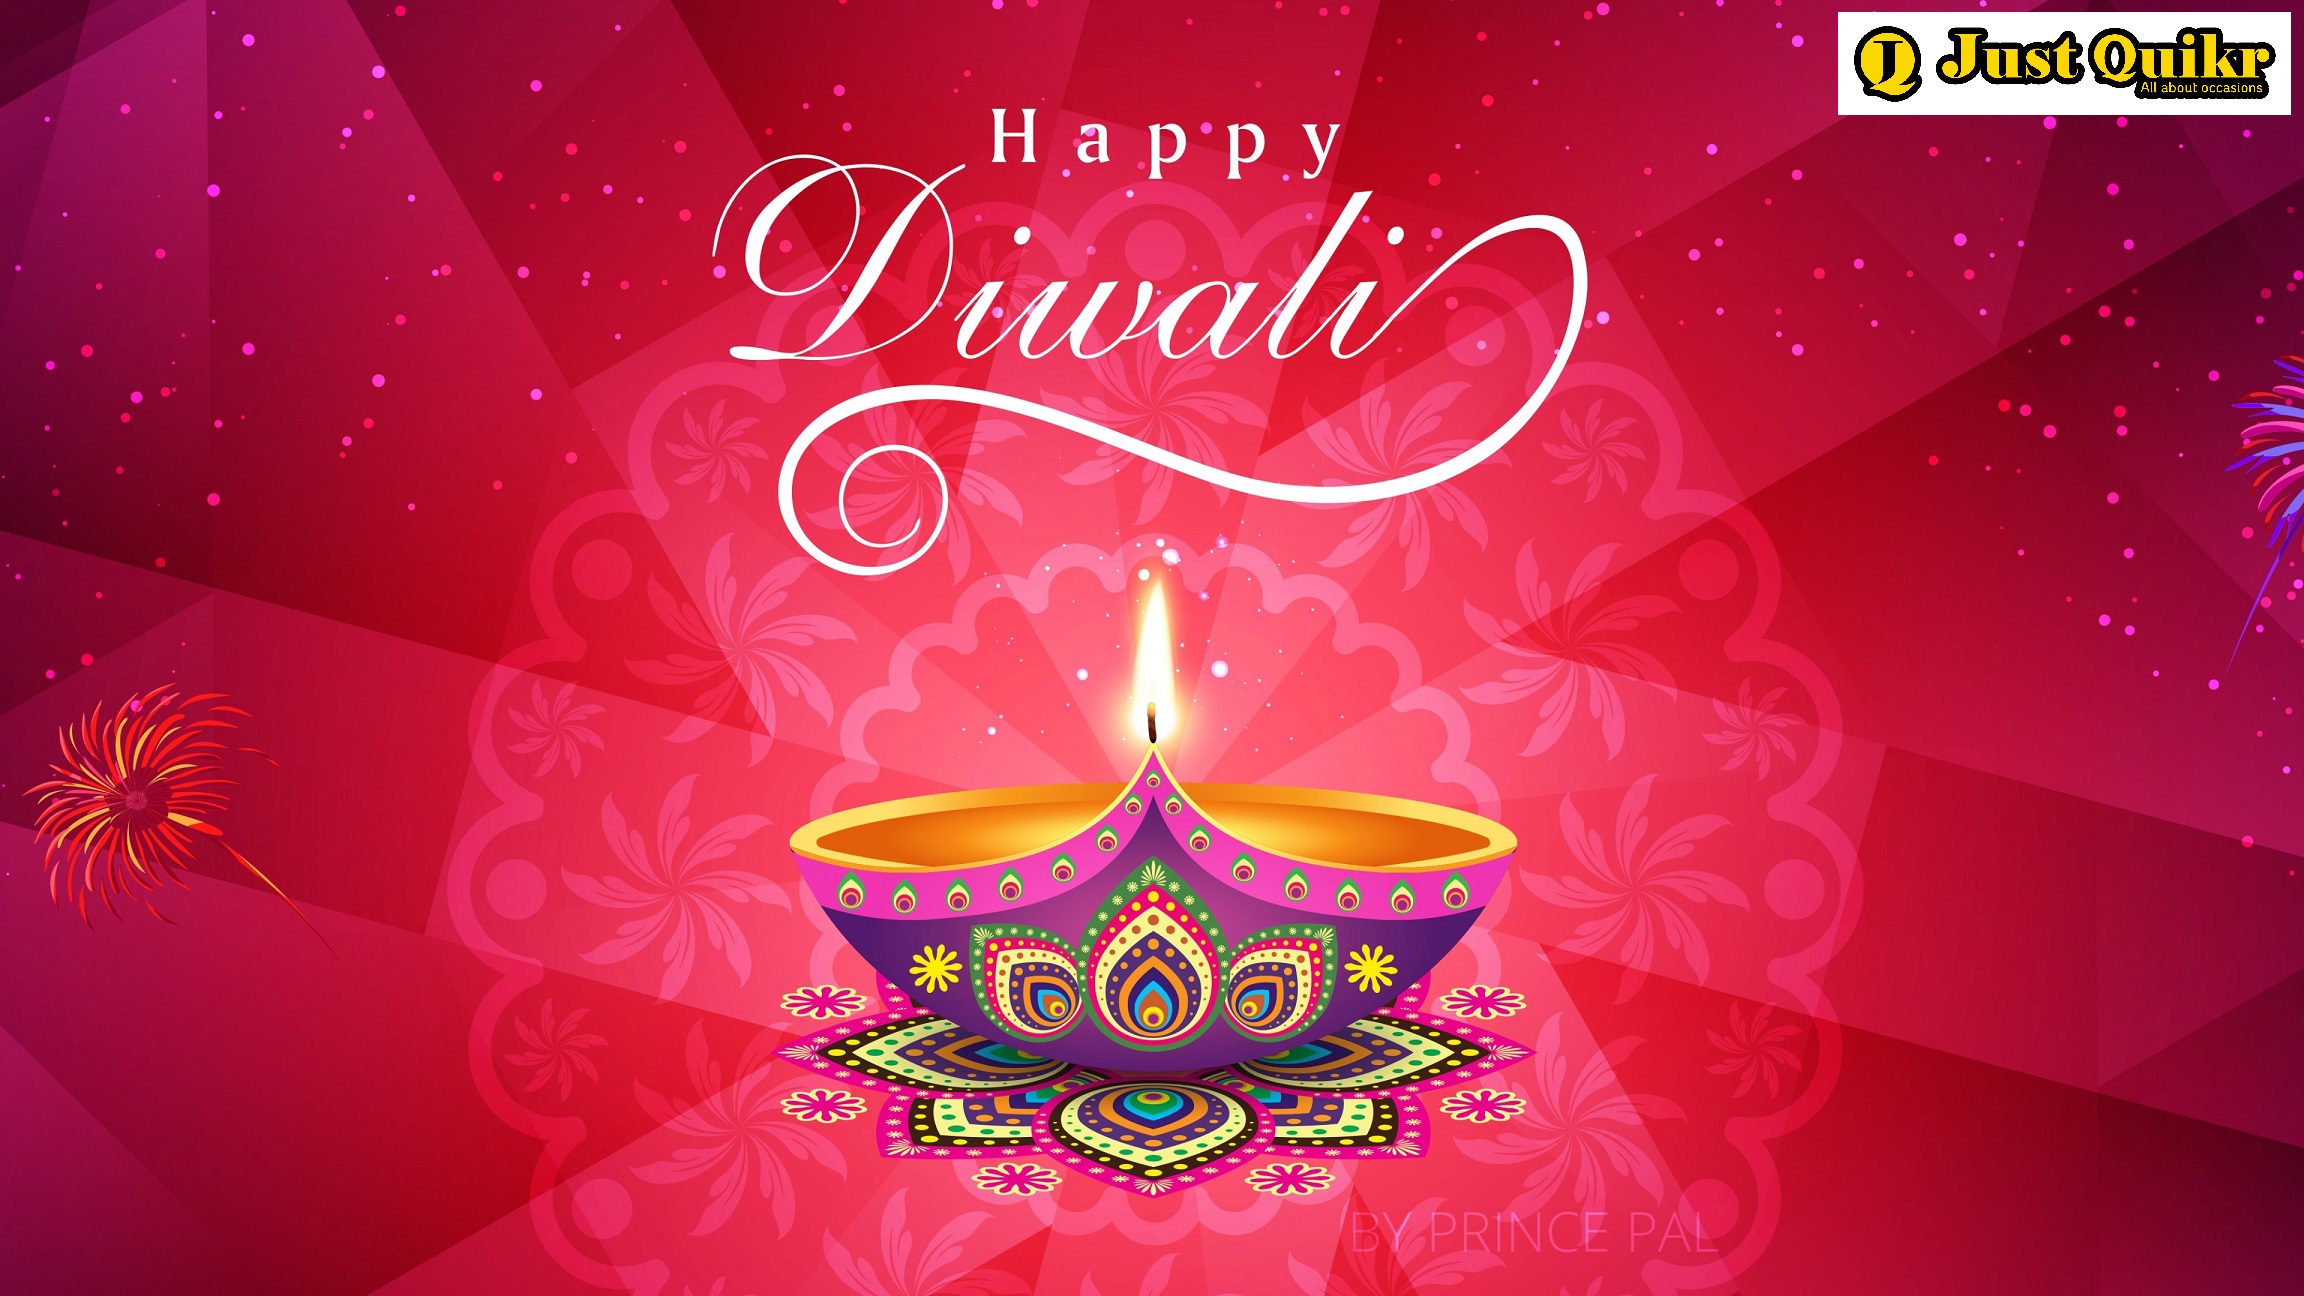 99+ Happy Diwali HD Images Pictures Wallpapers 2021 - Festival of Lights